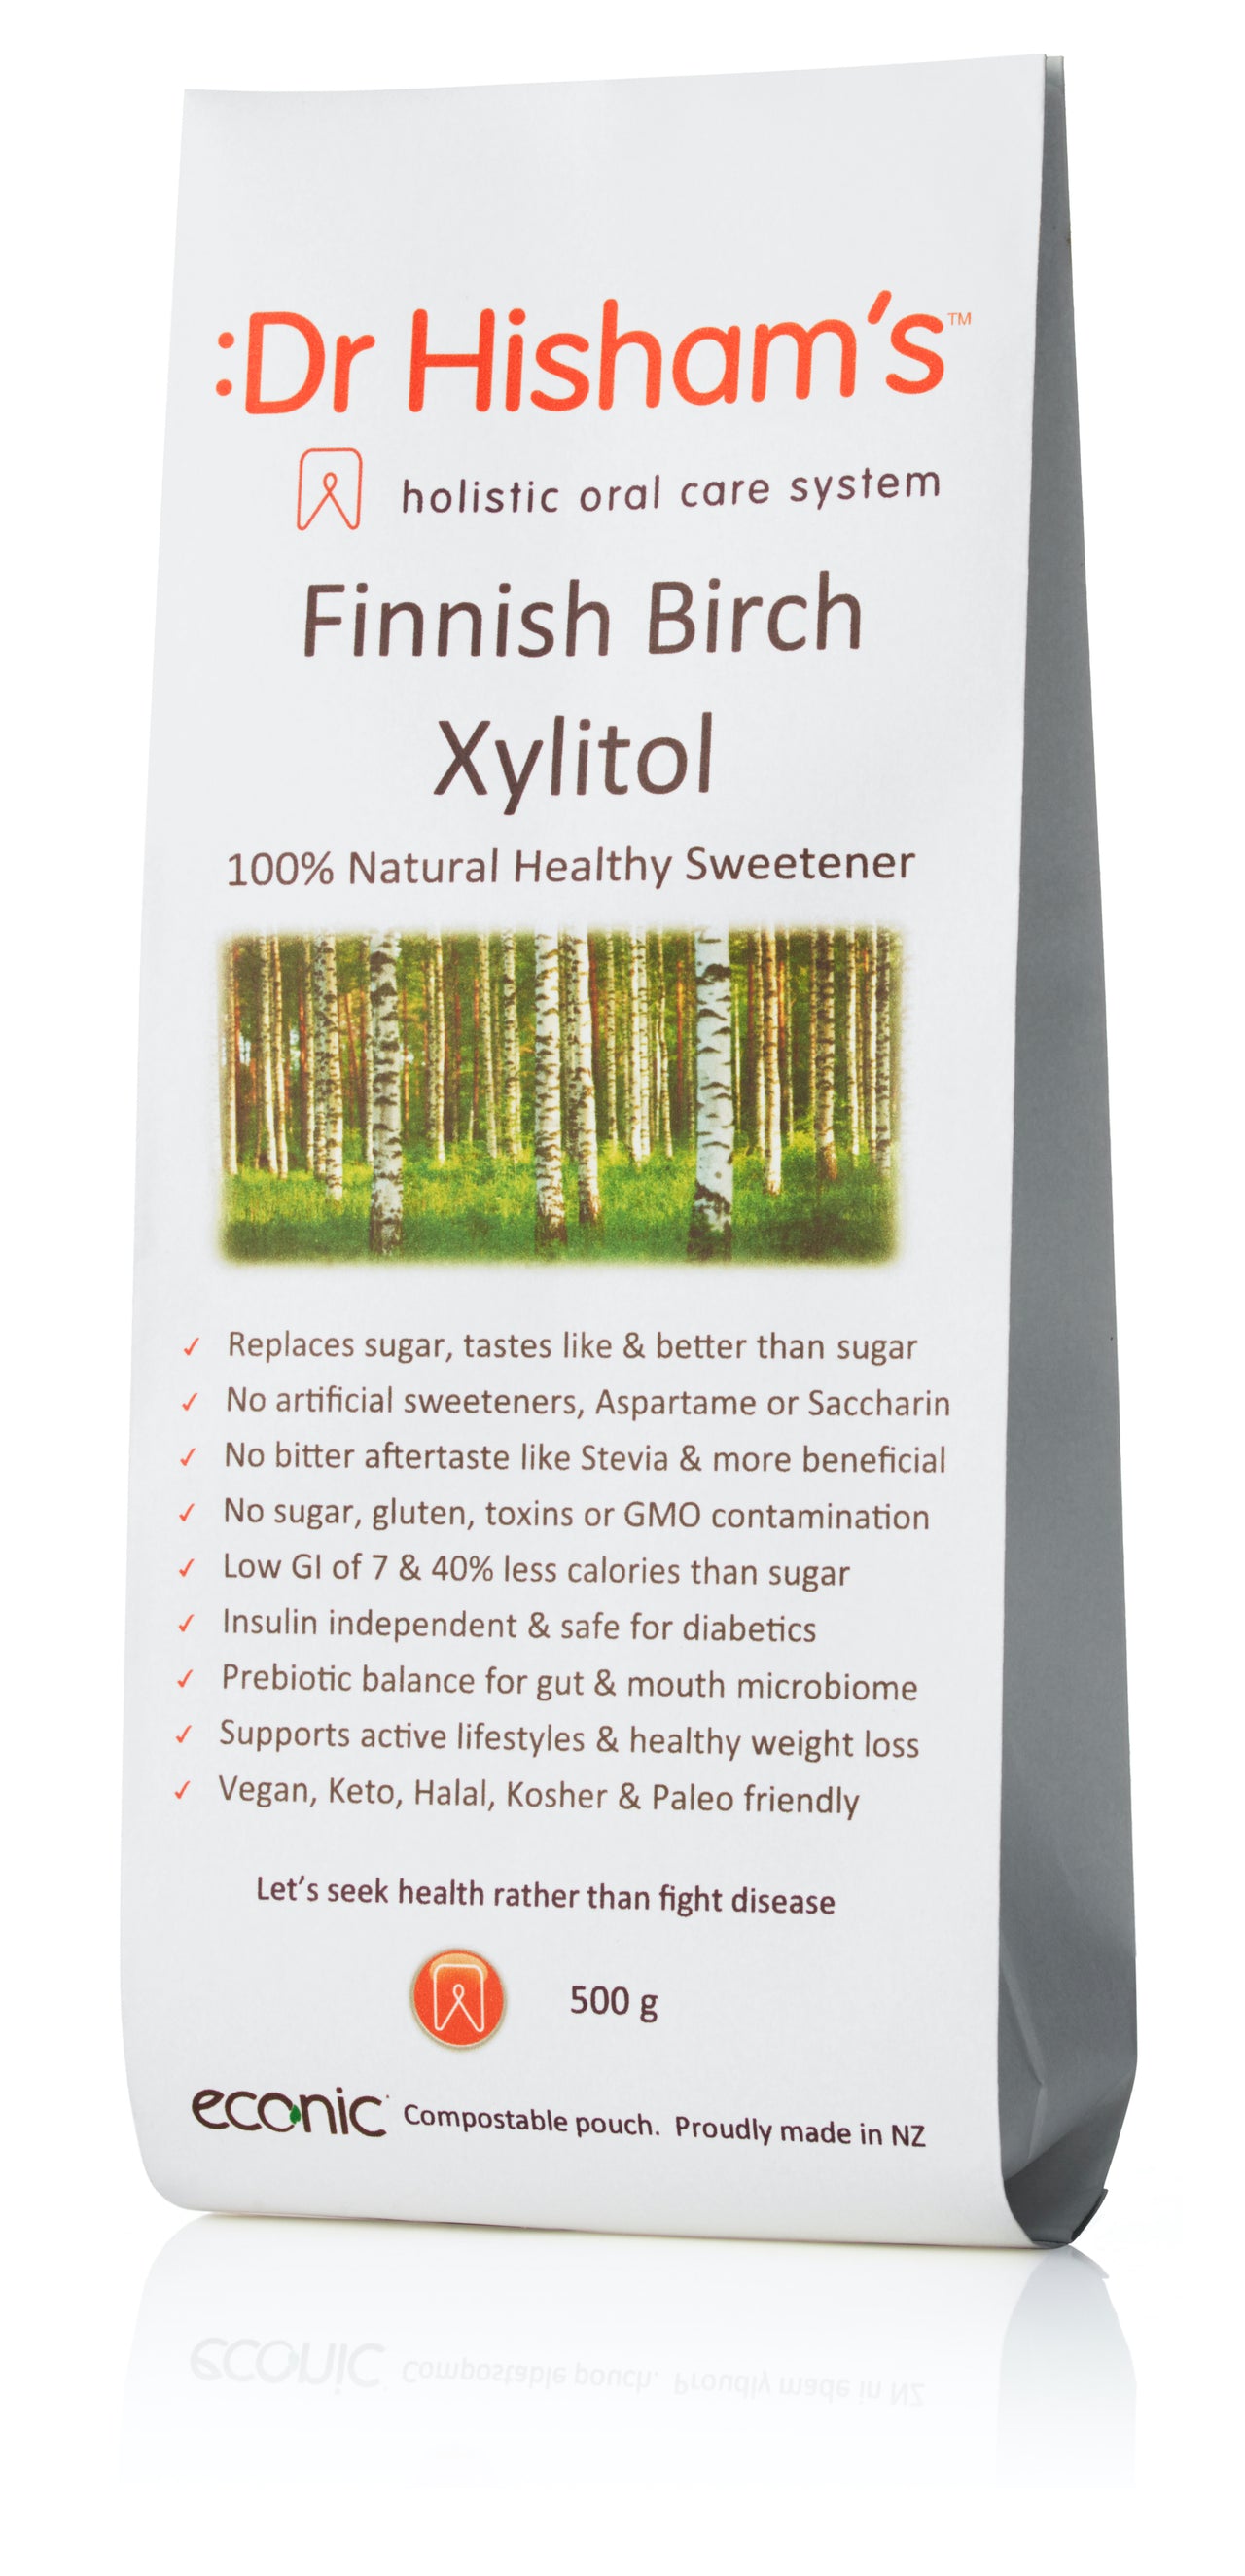 Birch Xylitol: the magic all natural sweetener. How good is it for you?